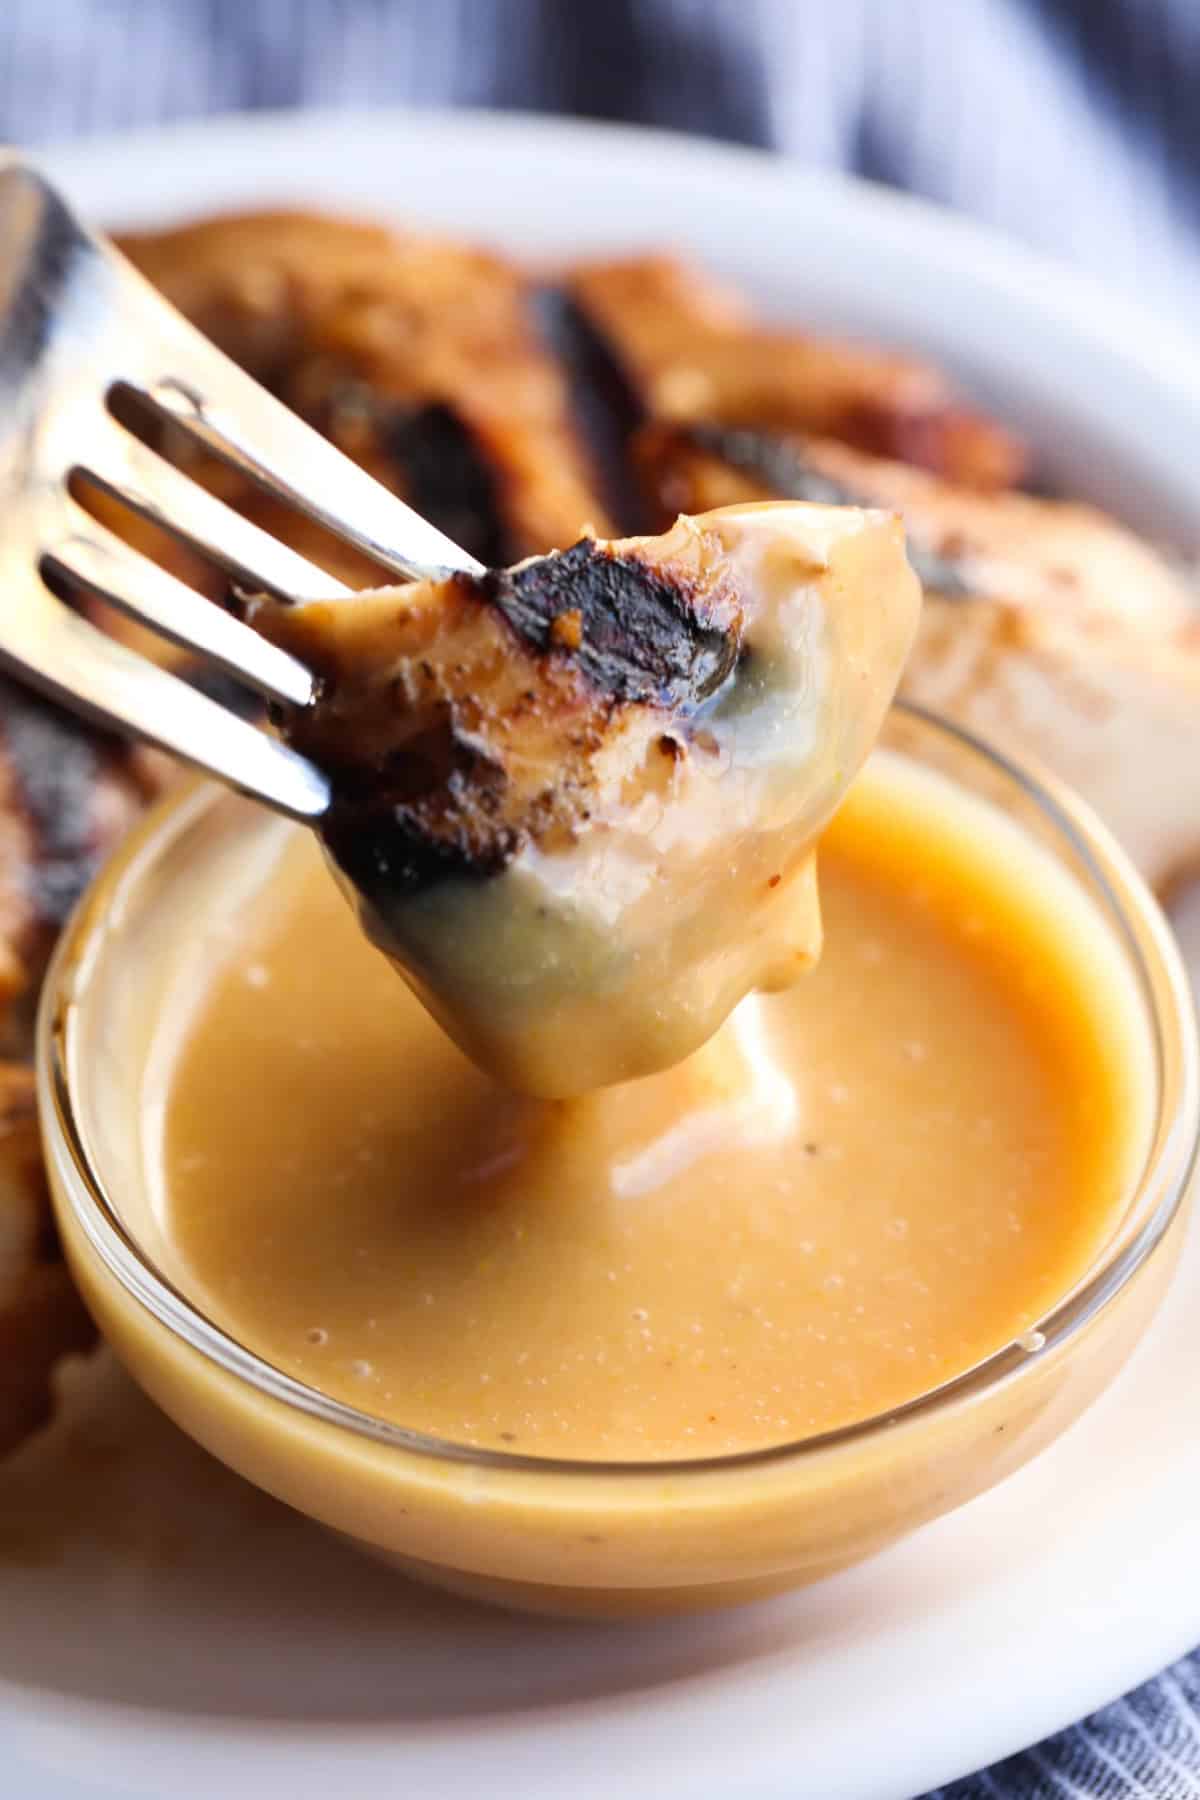 A piece of grilled chicken on a fork coated in homemade chick-fil-a chicken sauce